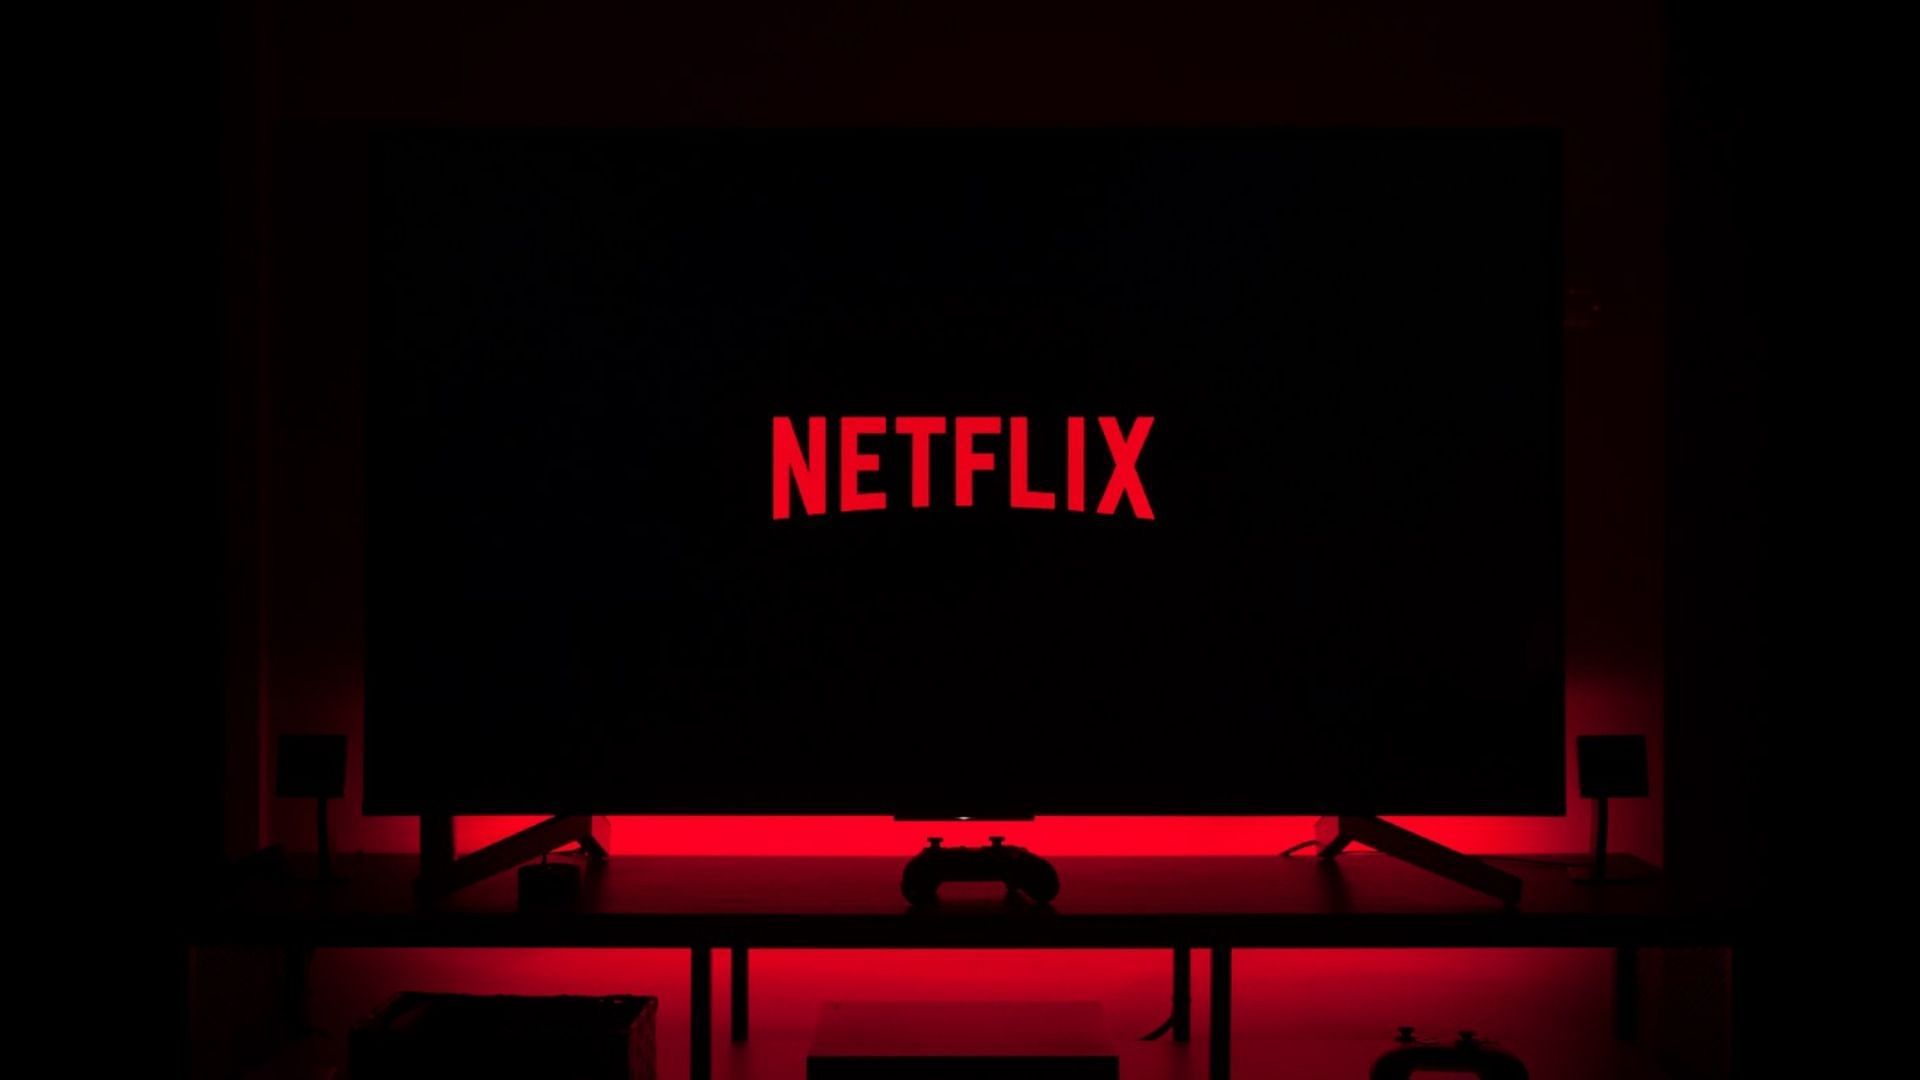 Netflix has been making several changes to improve its revenues and subscriber base (Image via Netflix)